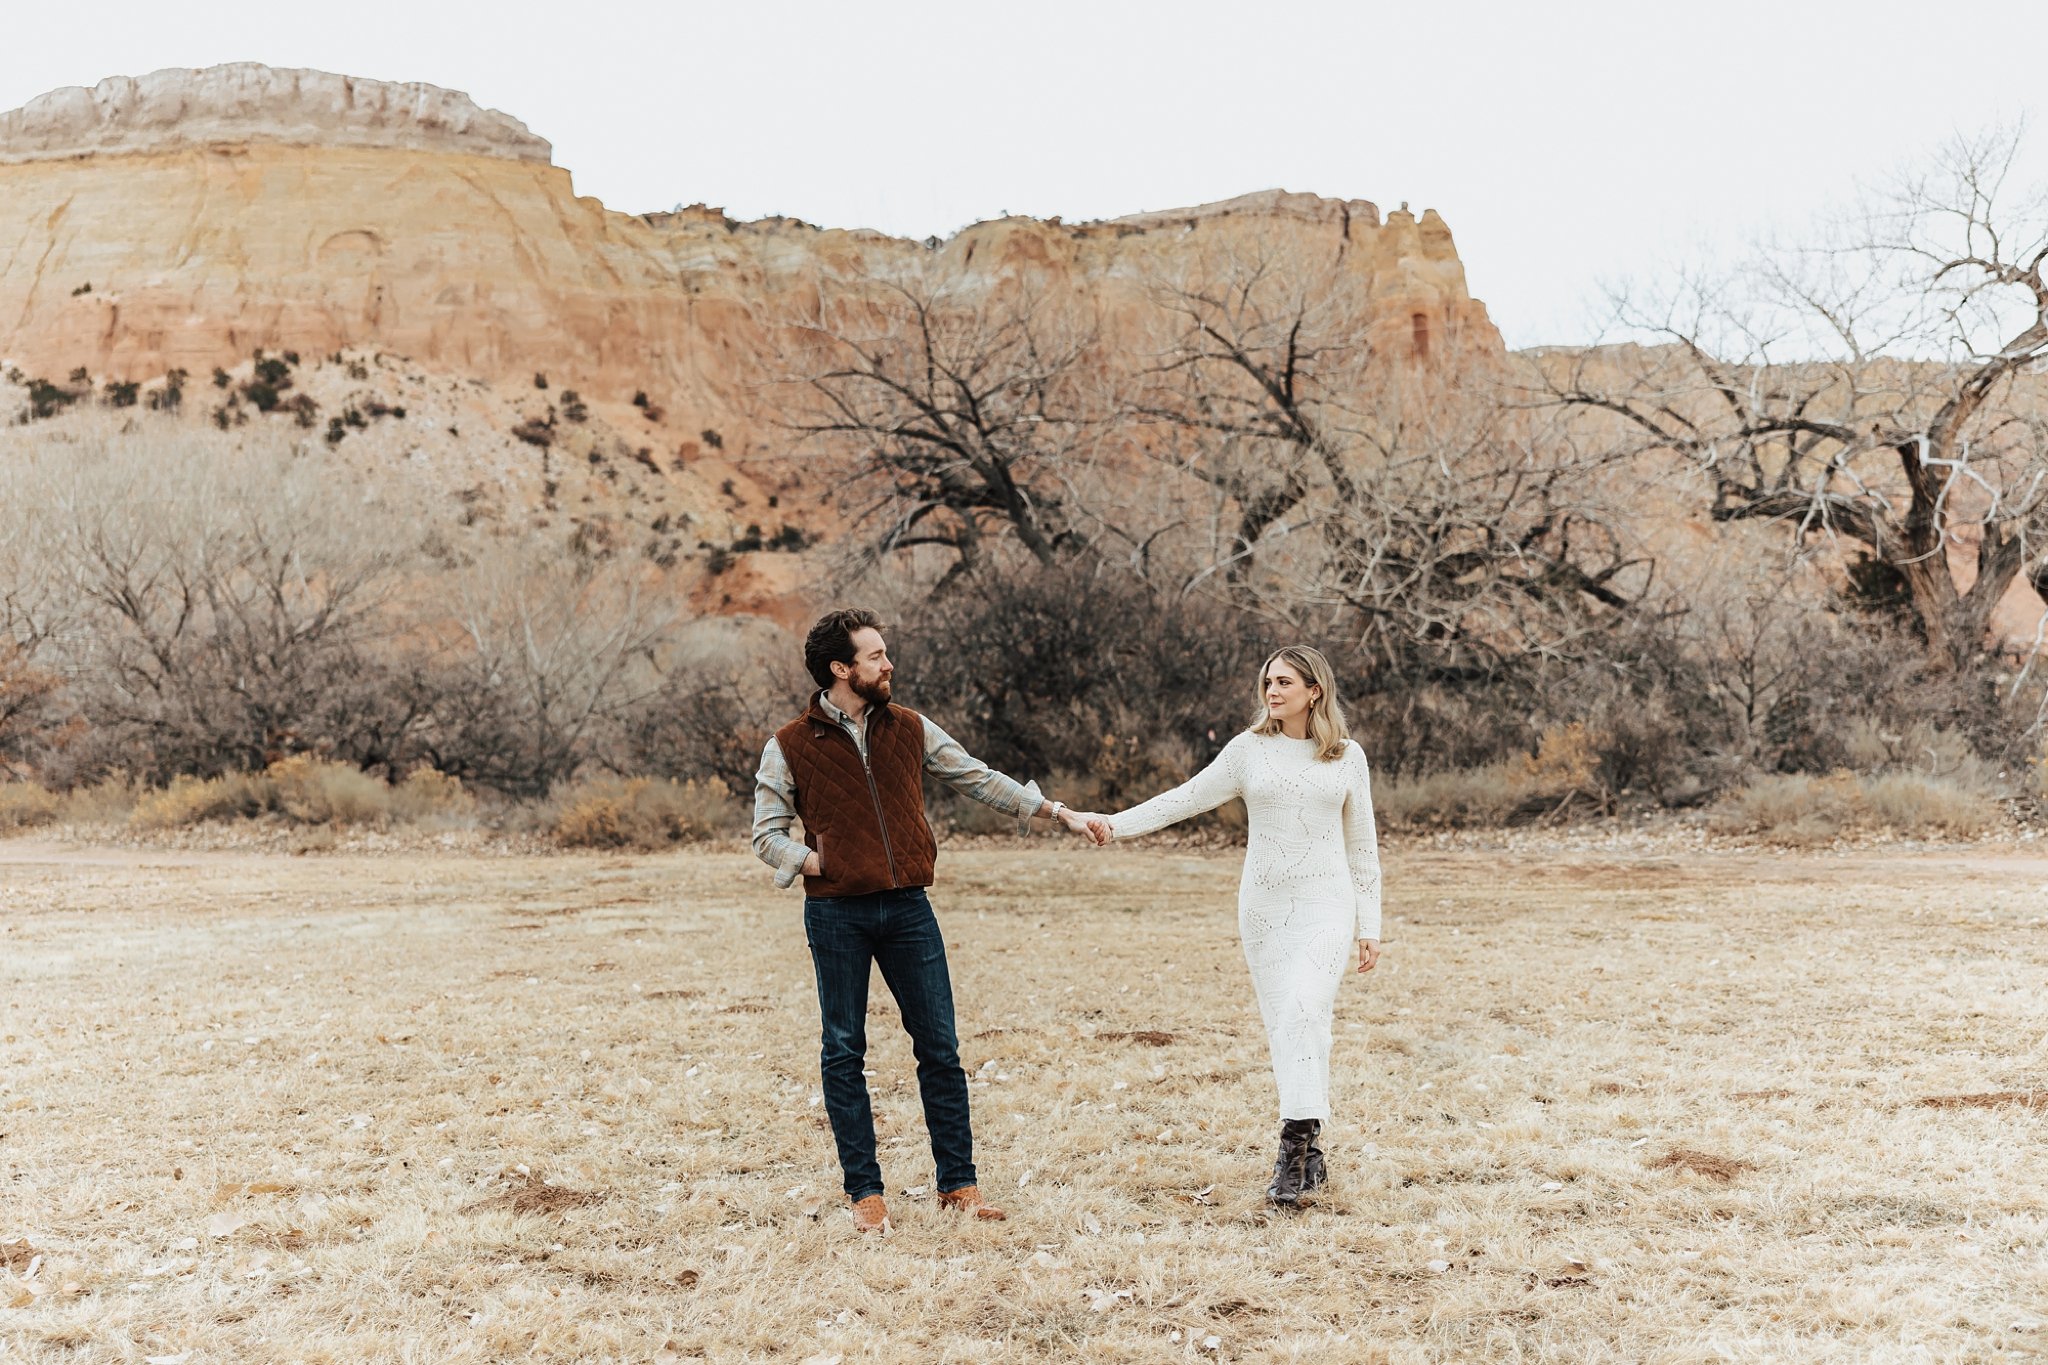 Alicia+lucia+photography+-+albuquerque+wedding+photographer+-+santa+fe+wedding+photography+-+new+mexico+wedding+photographer+-+new+mexico+wedding+-+southwest+engagement+-+ghost+ranch+engagement+-+ghost+ranch+wedding_0001.jpg